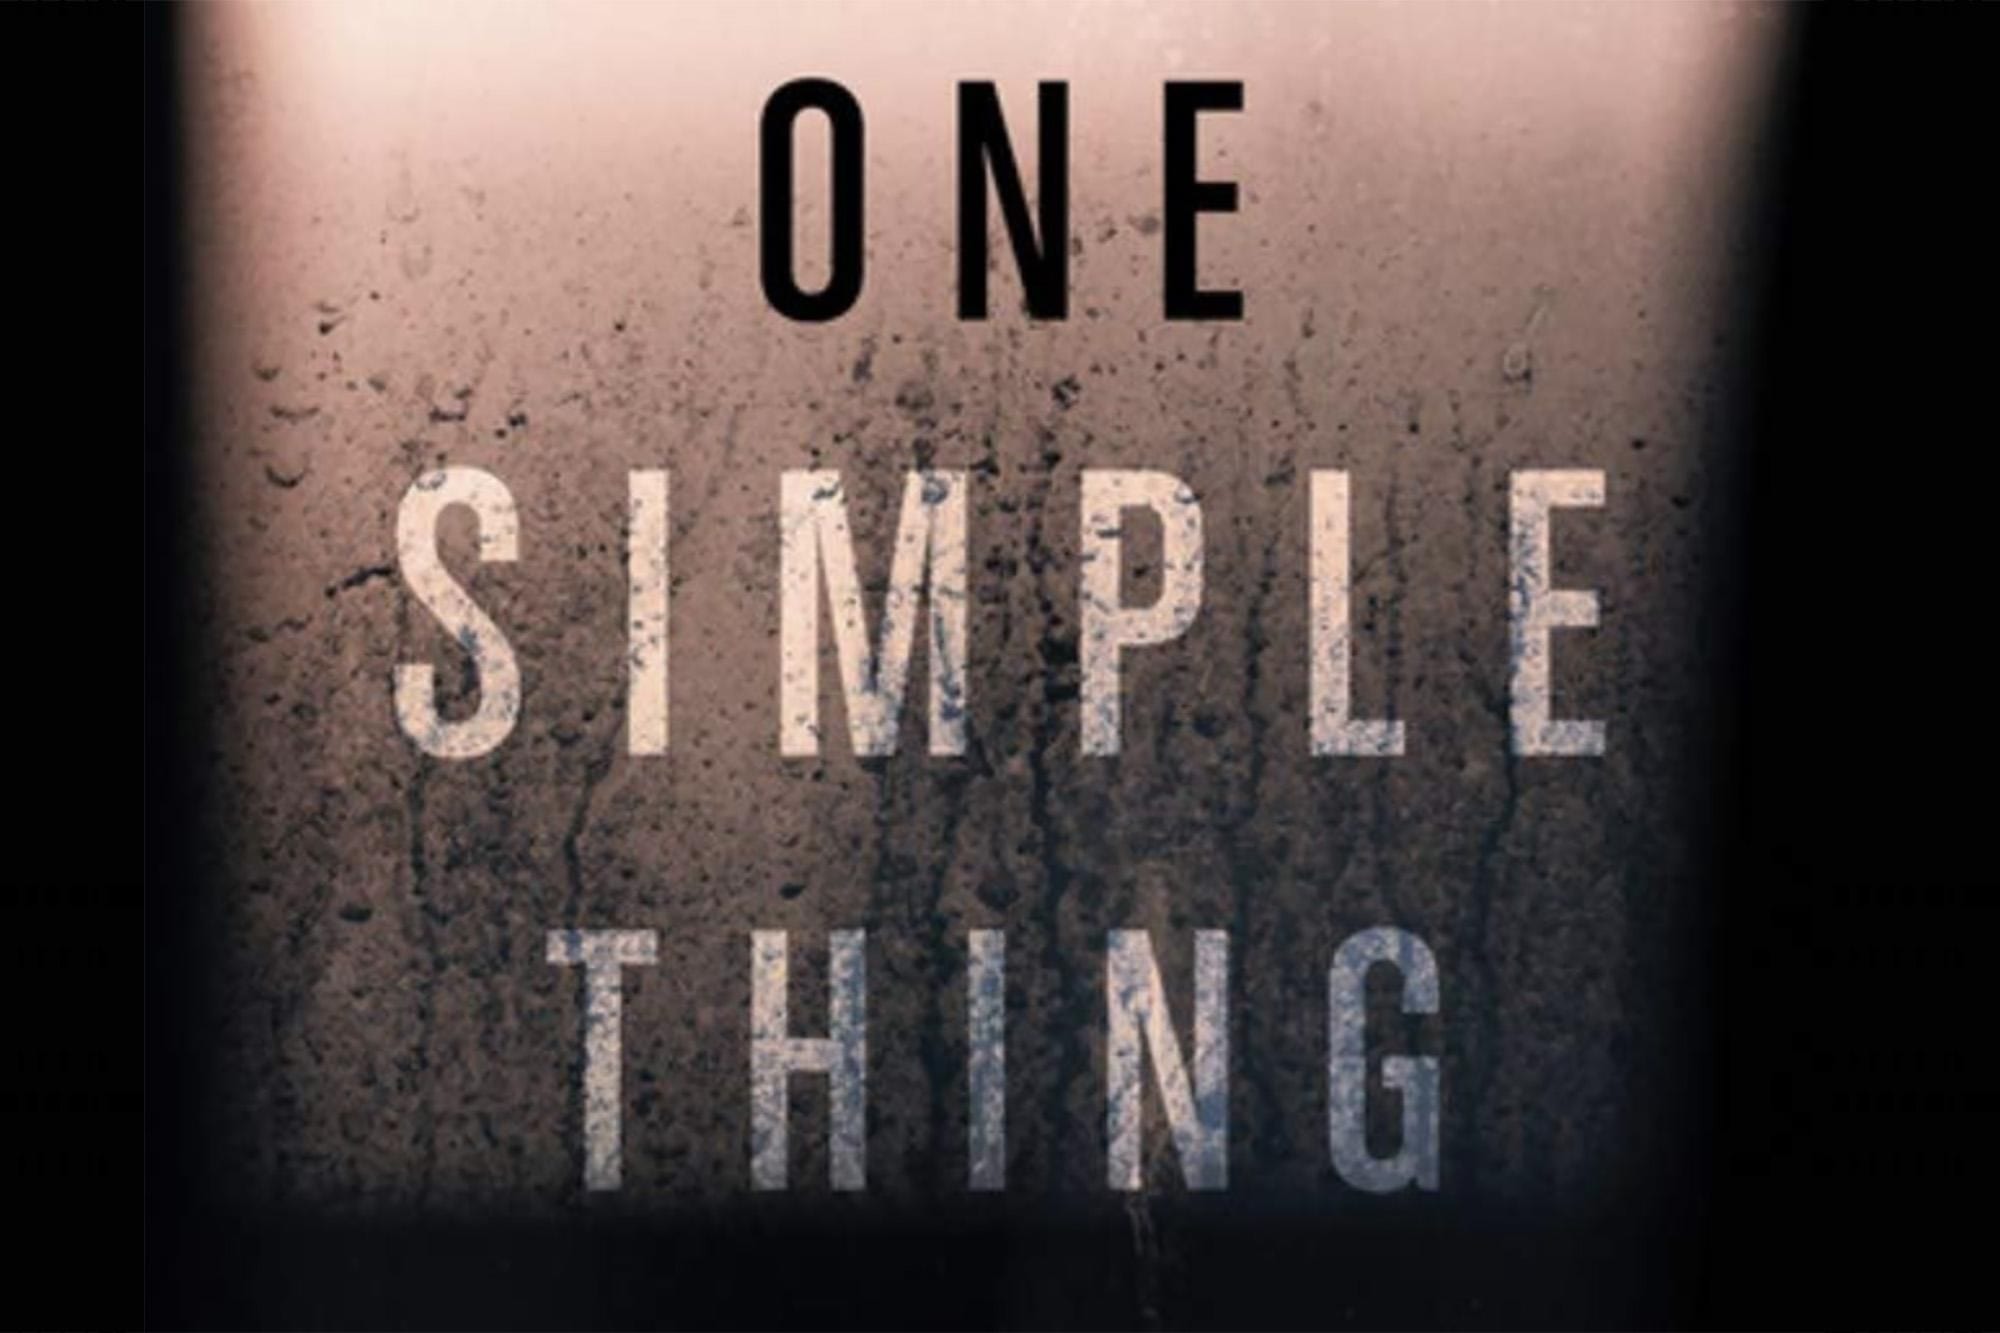 Warren Read’s ‘One Simple Thing’ Is Hardly So Simple